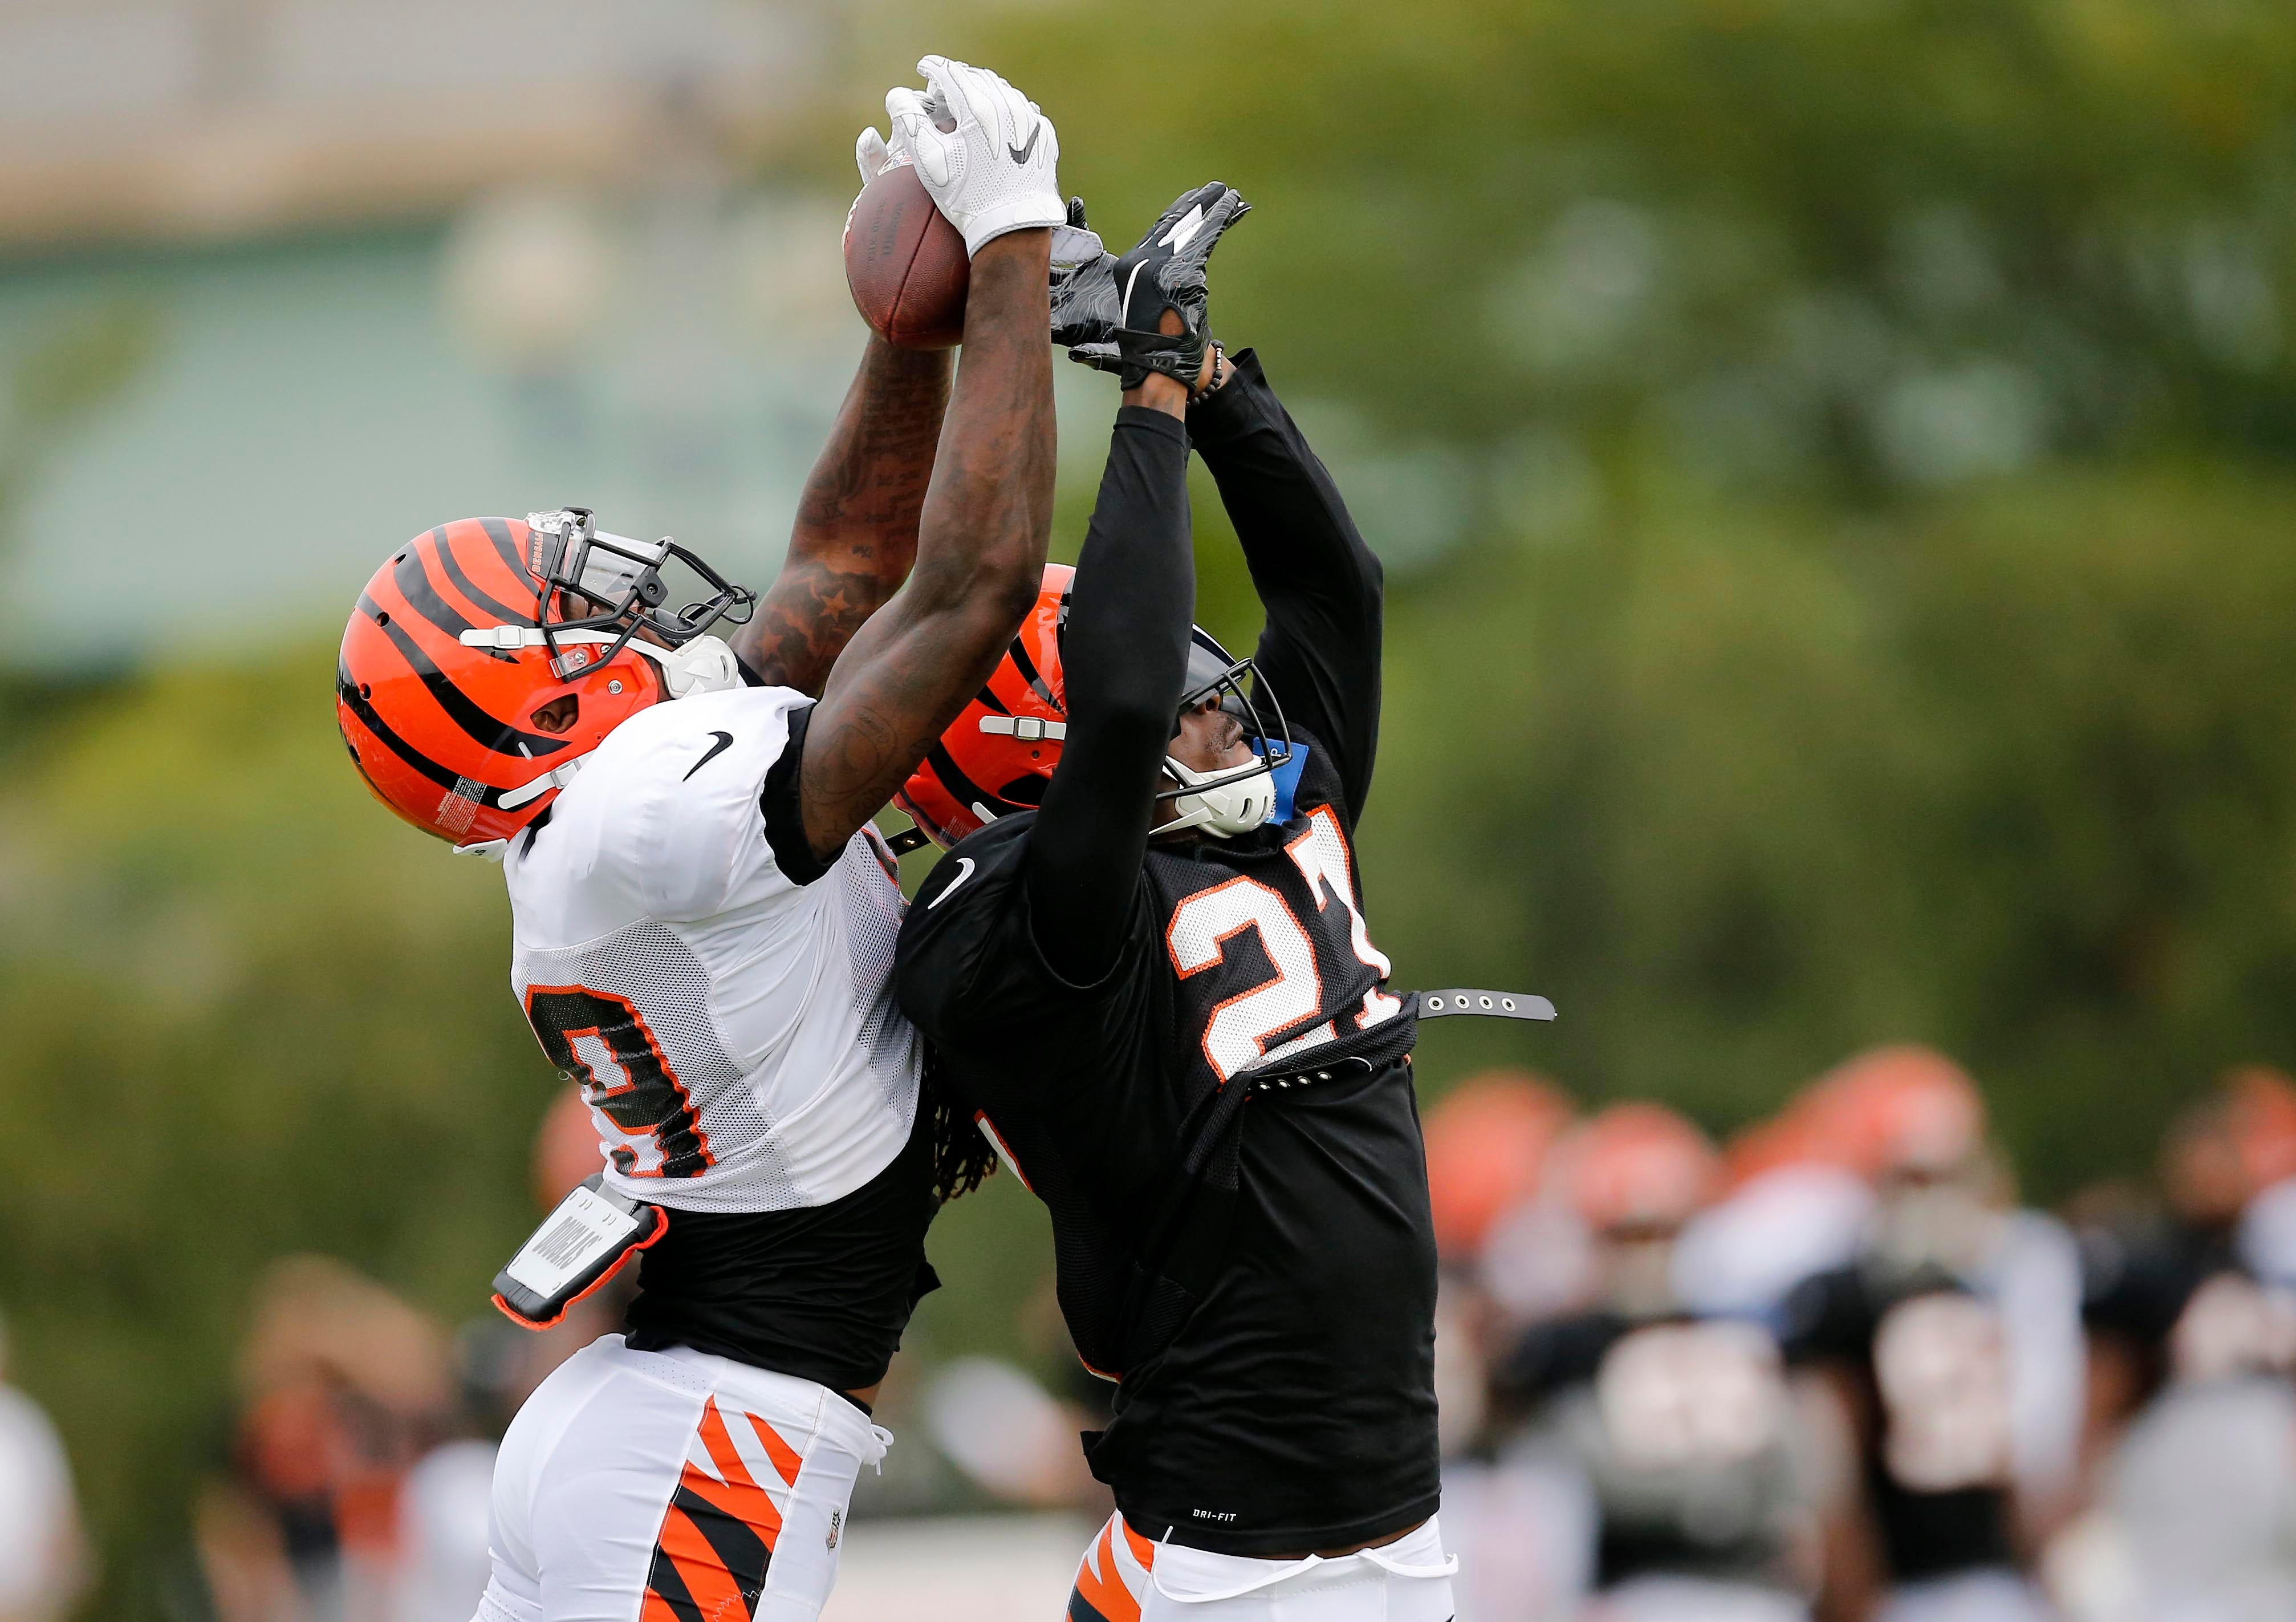 Cincinnati Bengals wide receiver Auden Tate, left, catches a pass over defensive back Dre Kirkpatrick during a camp practice session at the Paul Brown Stadium practice facility in Cincinnati.